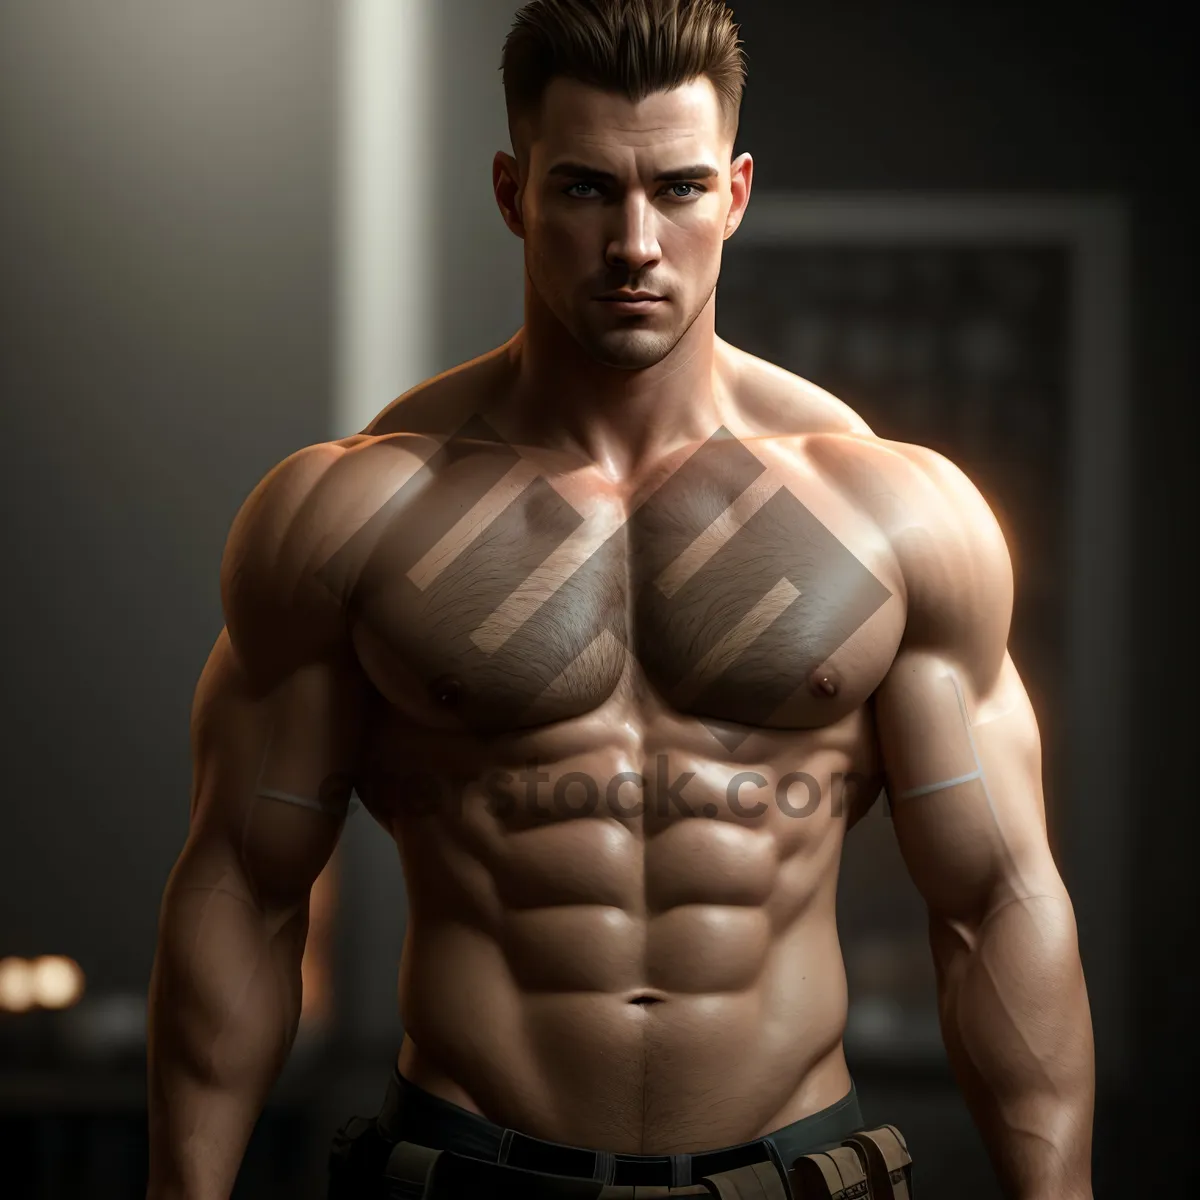 Picture of Muscular Male: Powerful, Ripped Torso